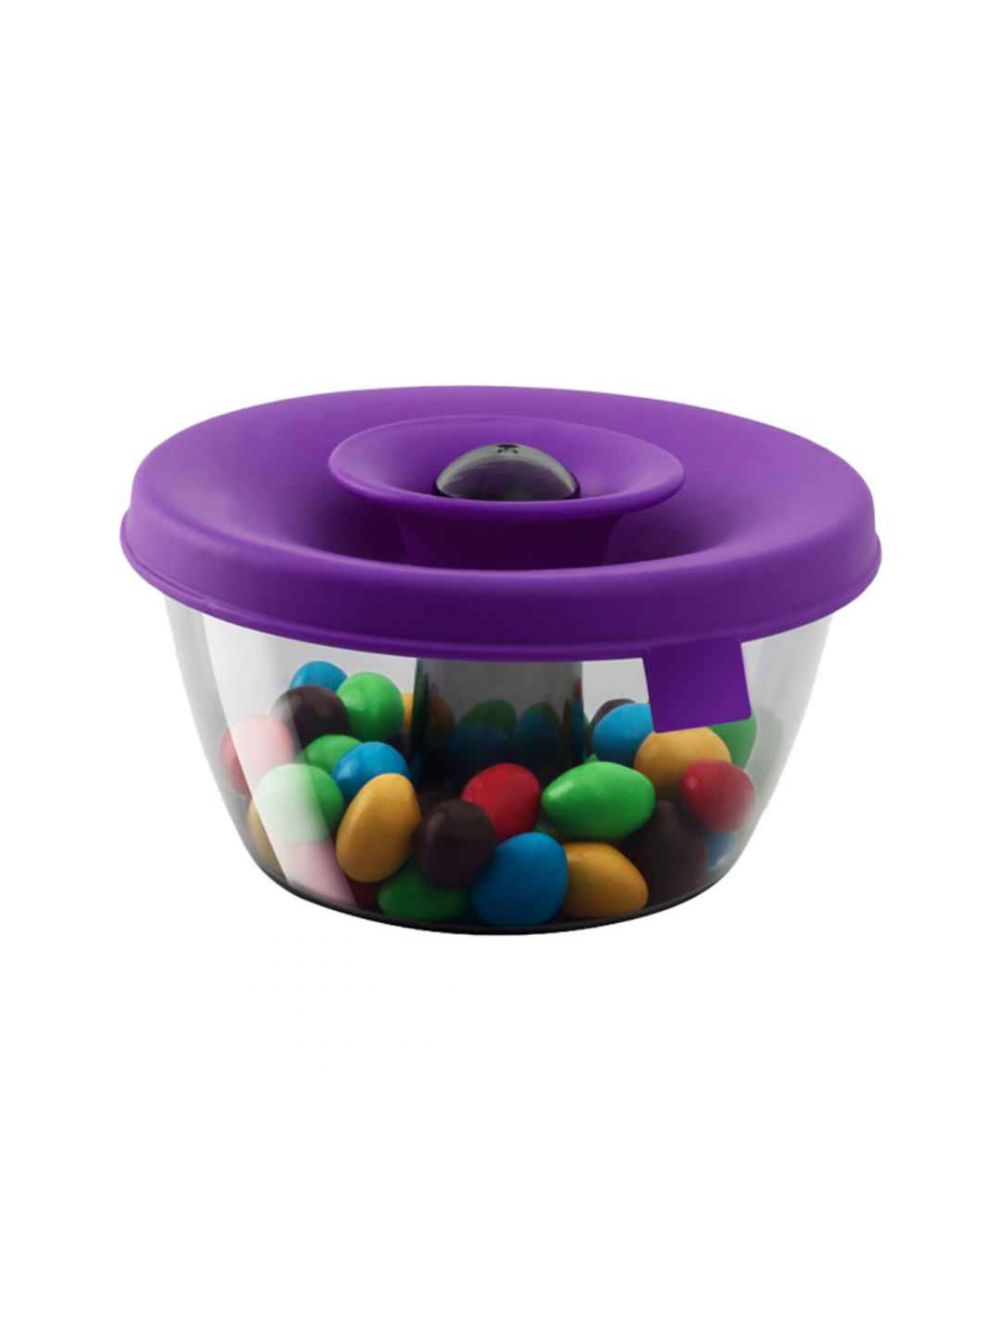 Tomorrows Kitchen PopSome Nut and Candy Dispenser-TK-2830860